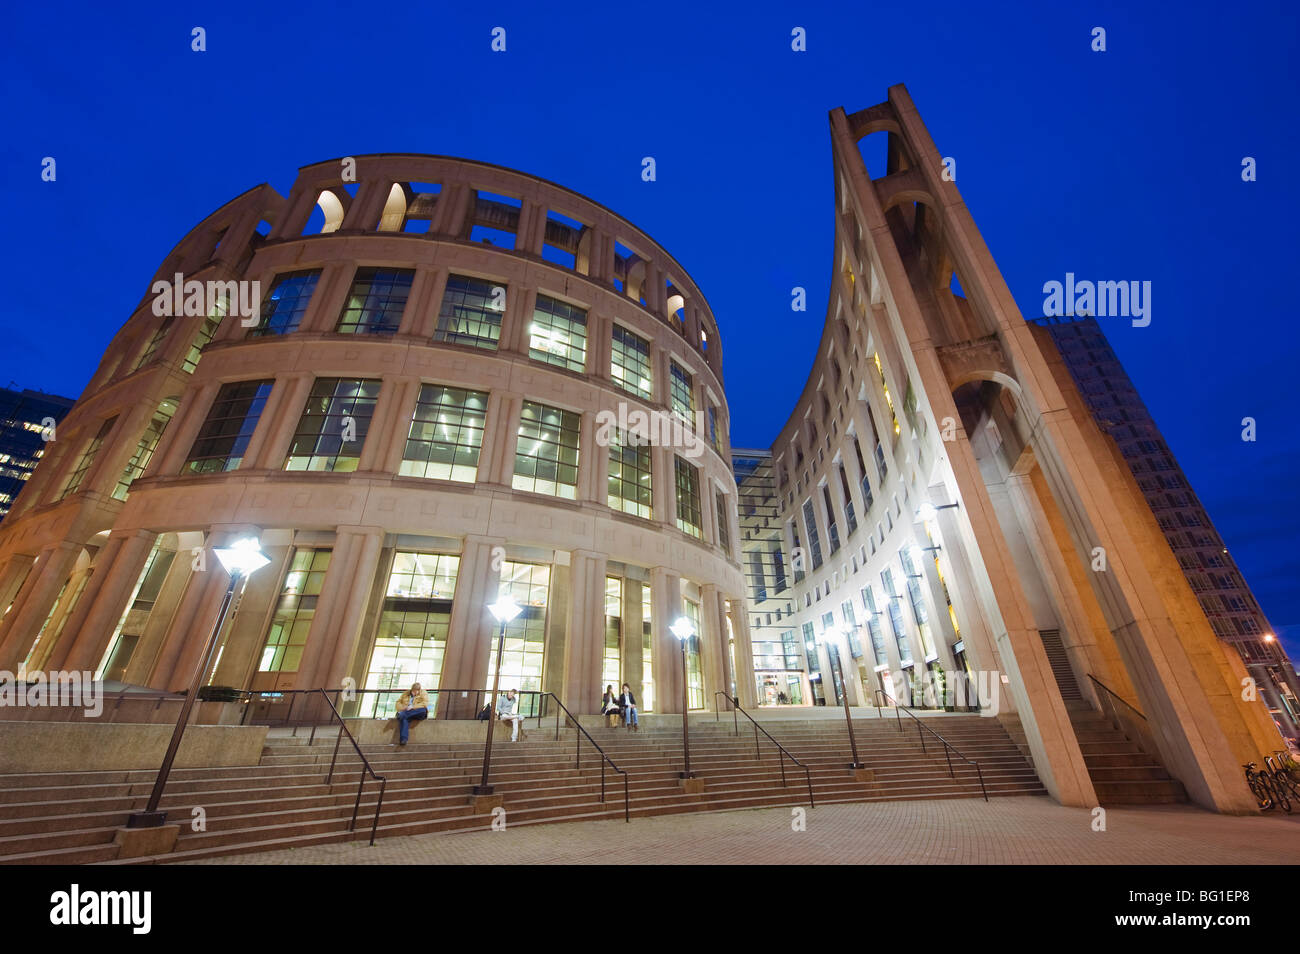 Vancouver Public Library, designed by Moshe Safdie, Vancouver, British Columbia, Canada, North America Stock Photo